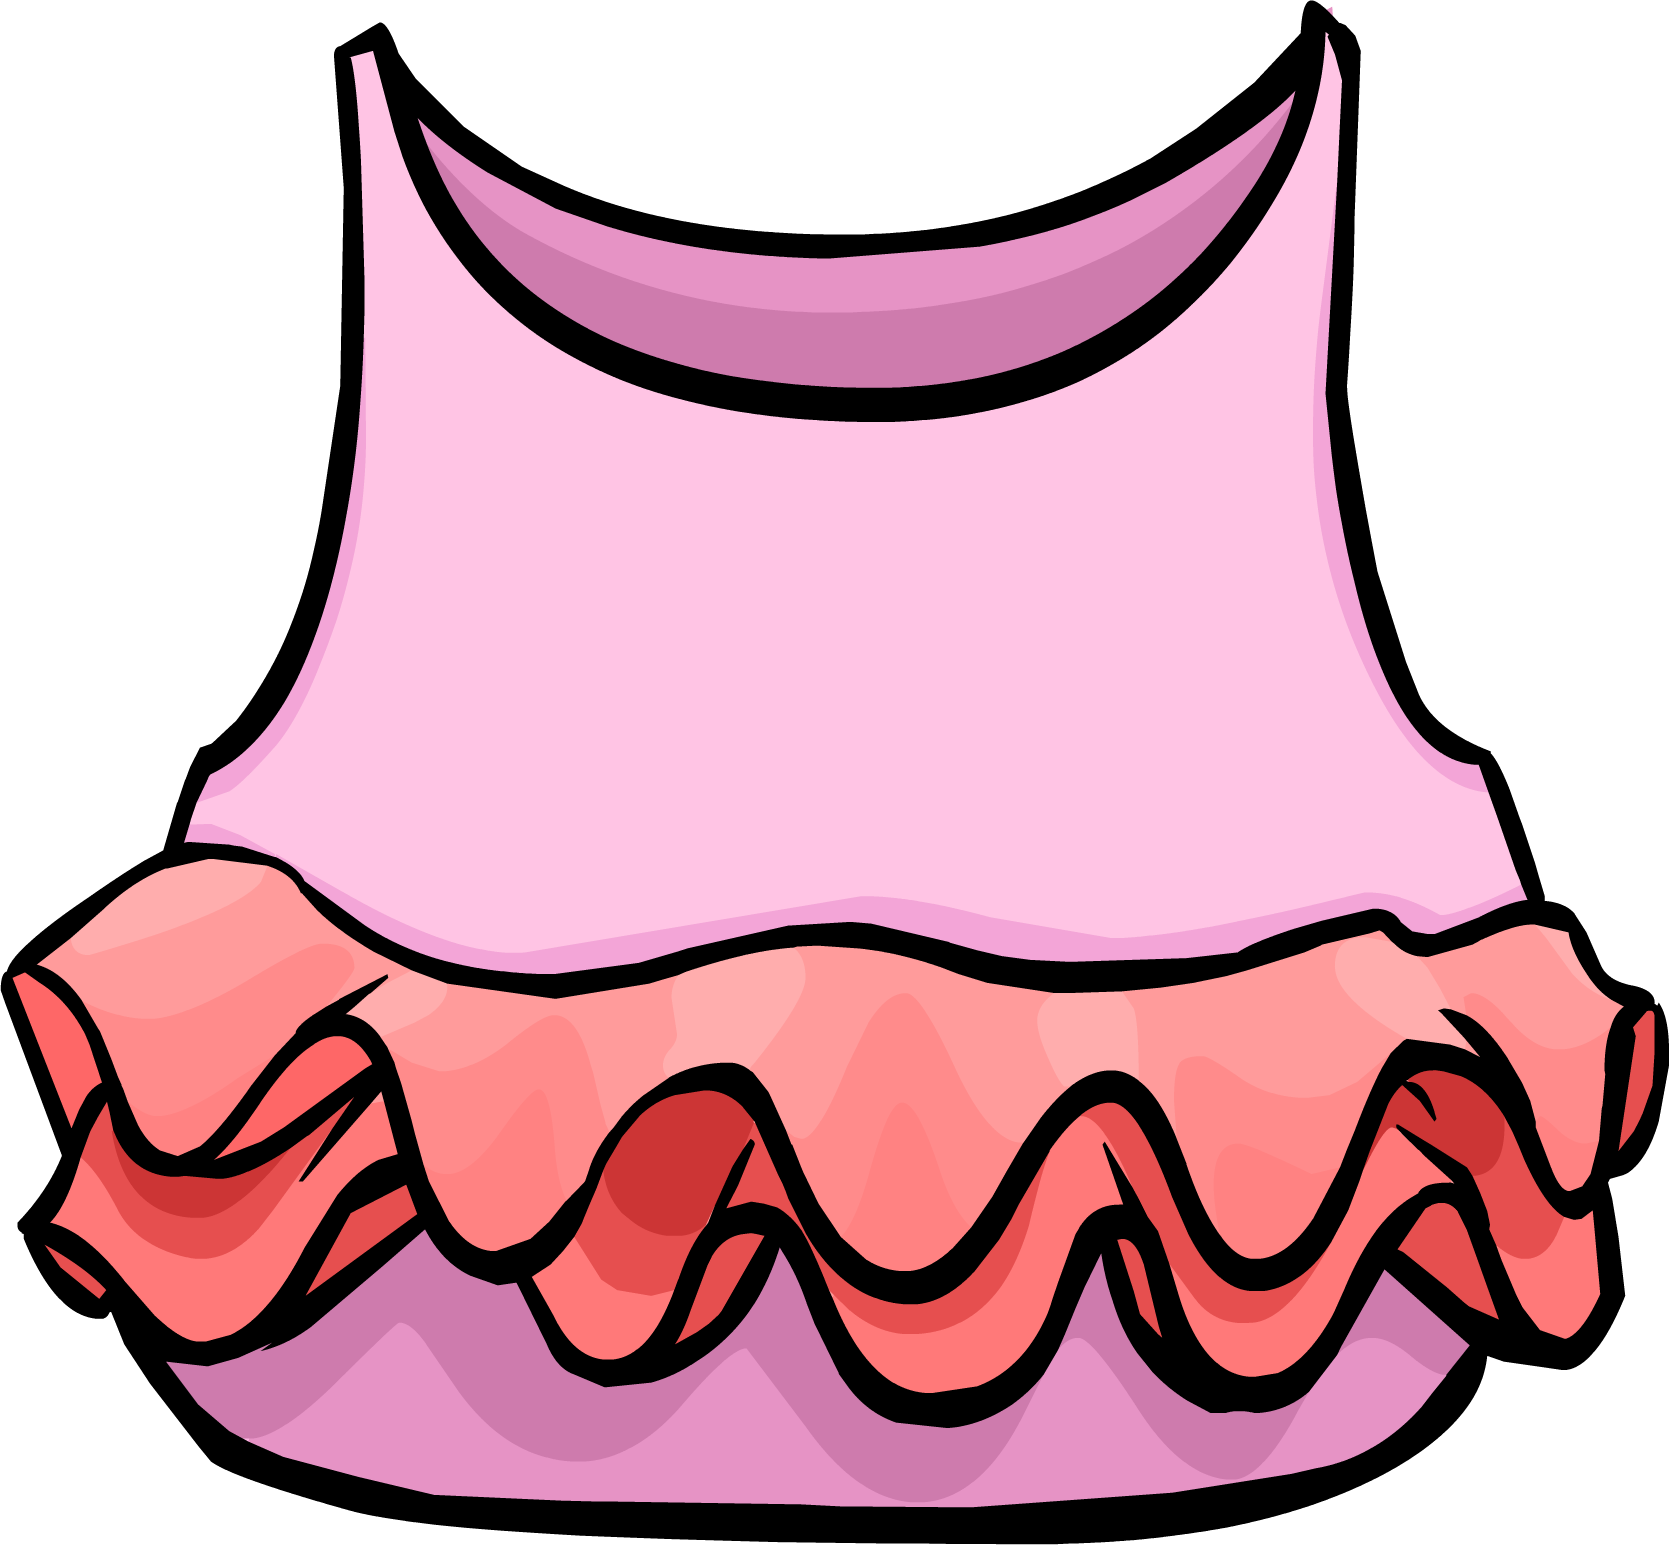 Category pink items club. Tutu clipart ballet dress